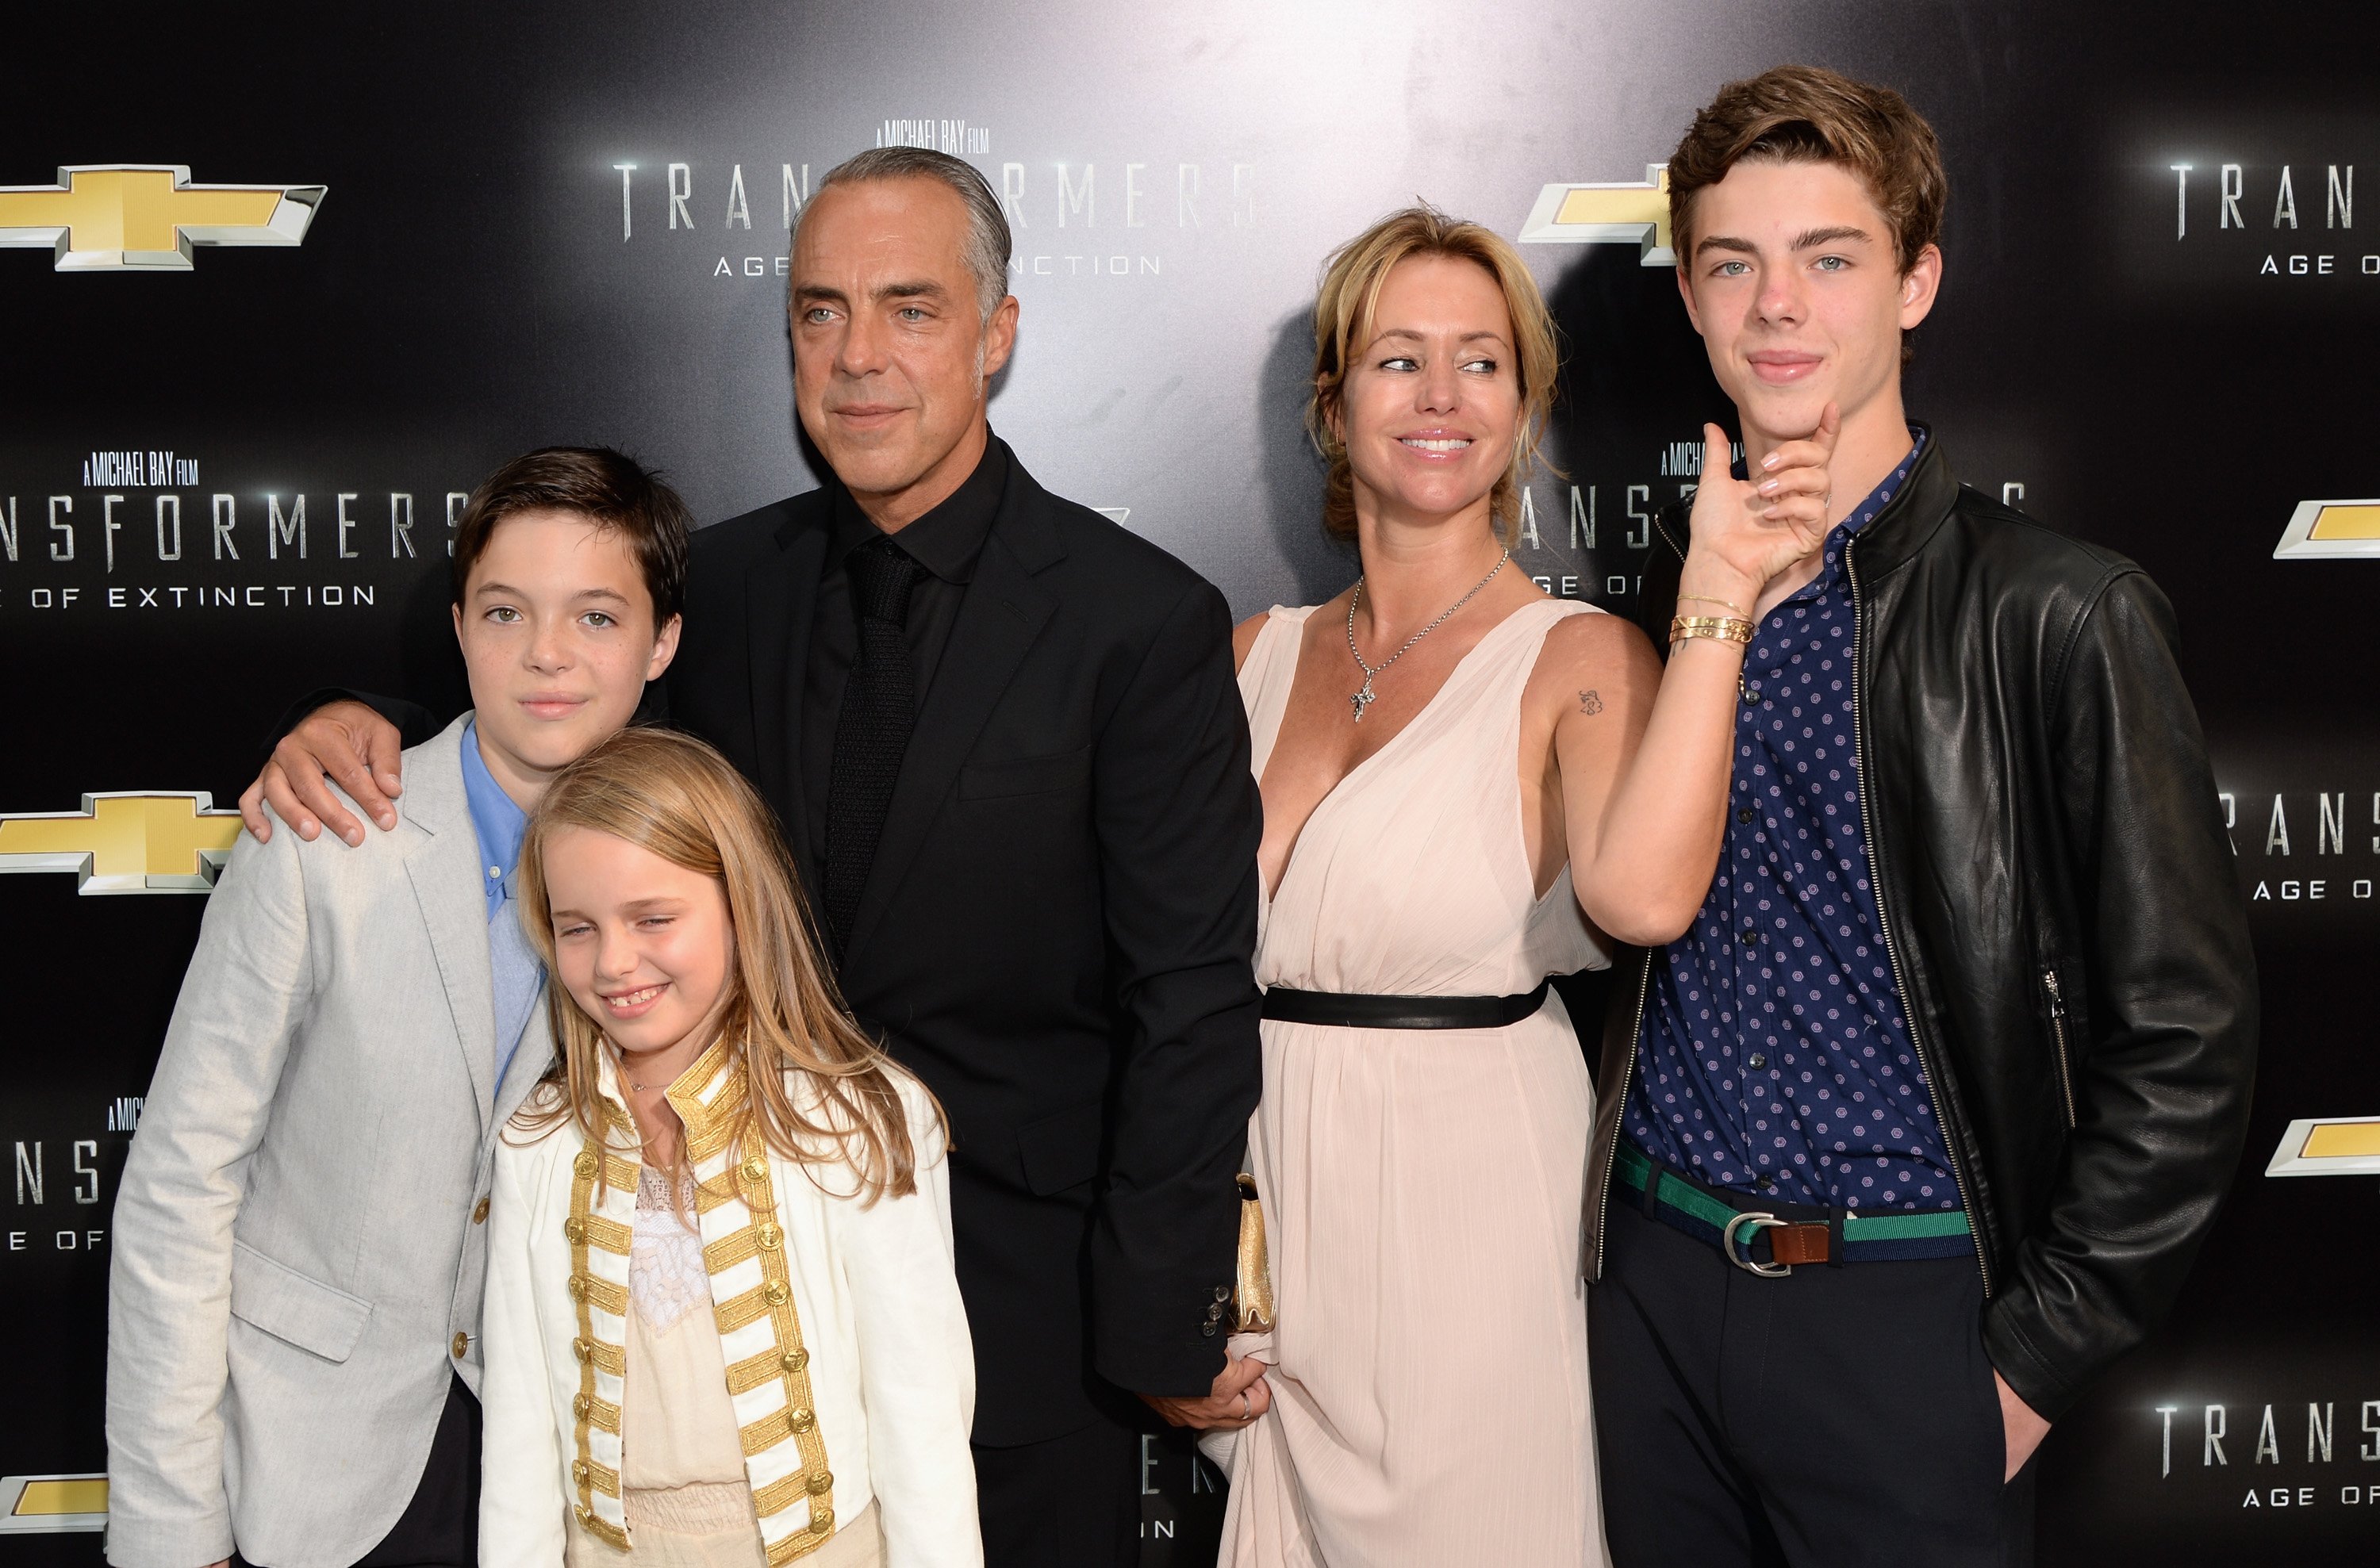 (L-R) Quinn Welliver, Cora Welliver, actor Titus Welliver, Jose Stemkens, and Eamon Welliver attend the New York Premiere of "Transformers: Age Of Extinction" at the Ziegfeld Theatre on June 25, 2014, in New York City. | Source: Getty Images